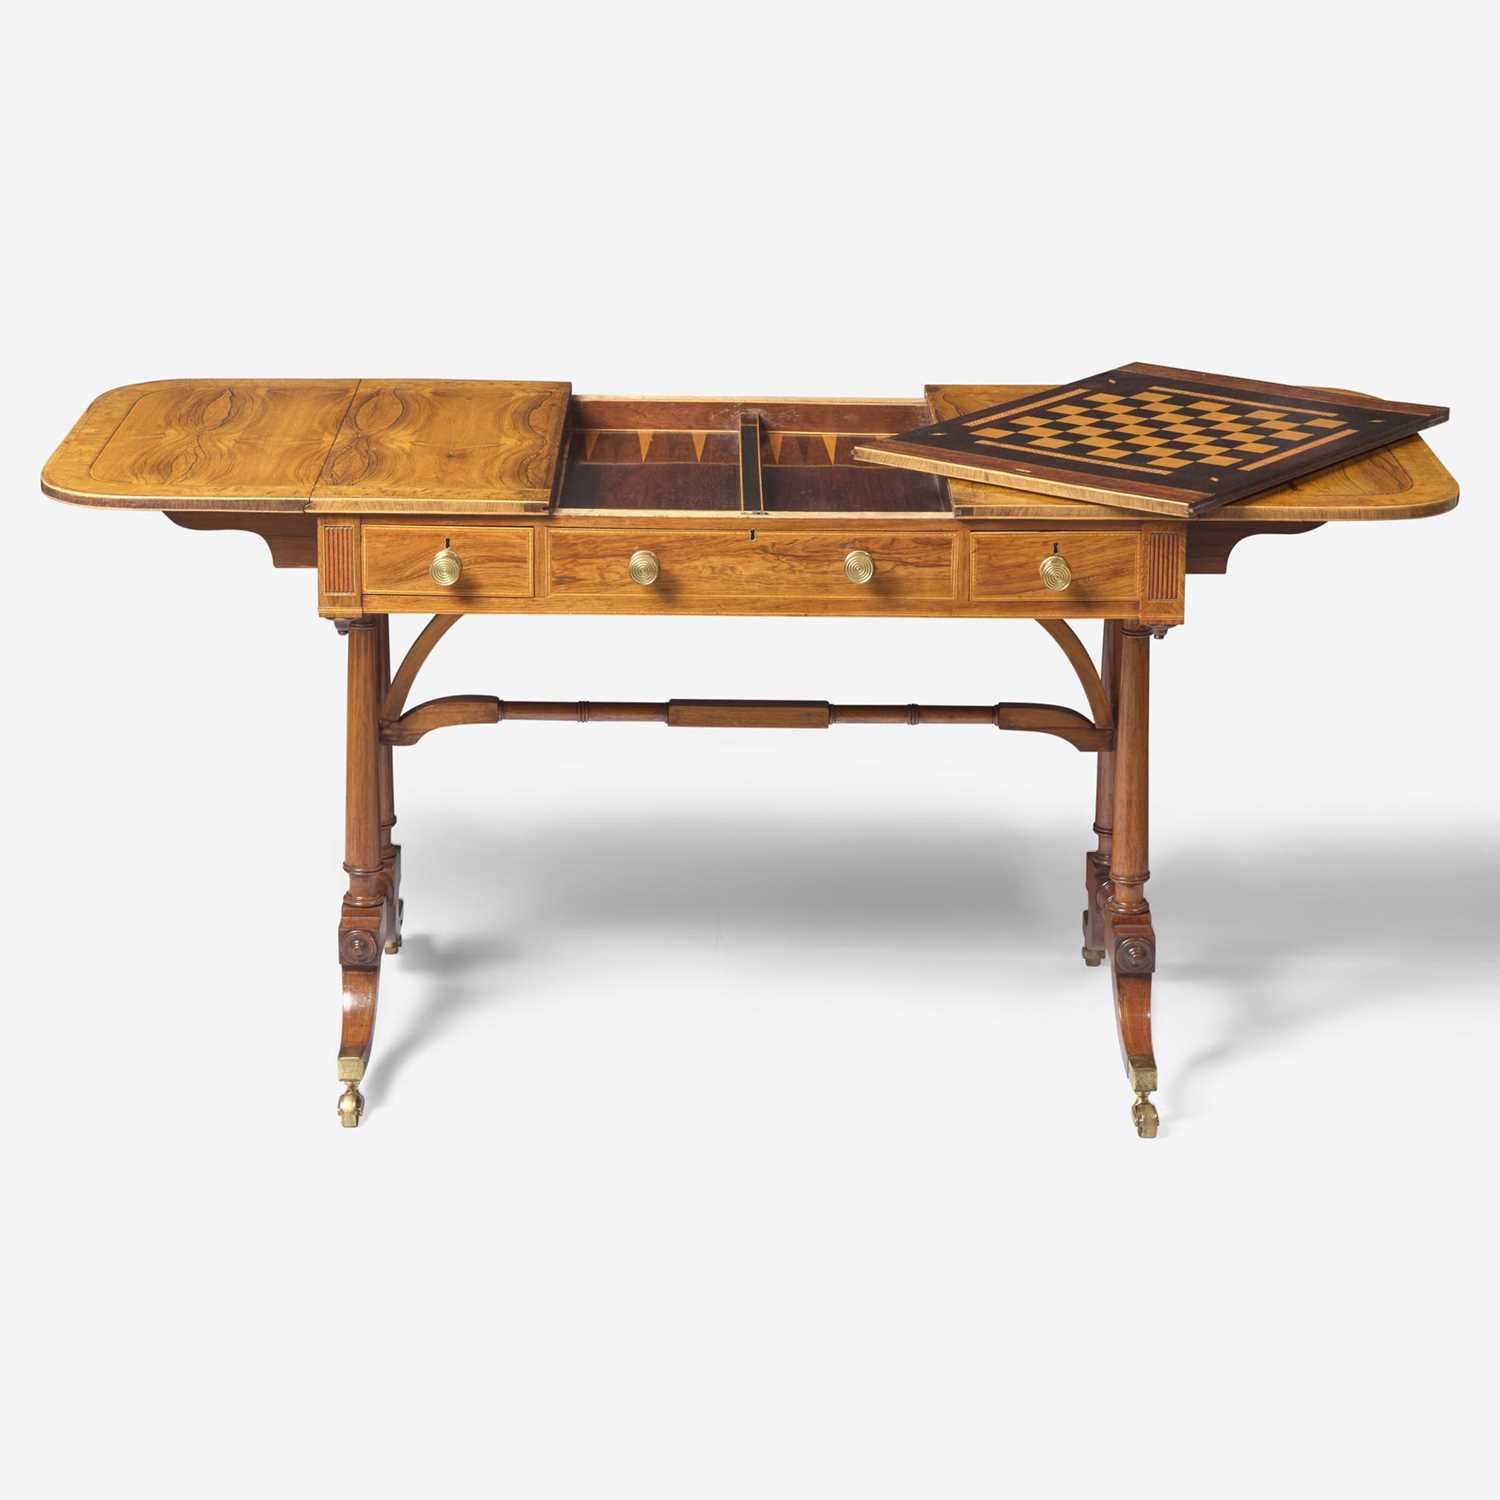 Lot 38 - A Regency inlaid rosewood and yew sofa table